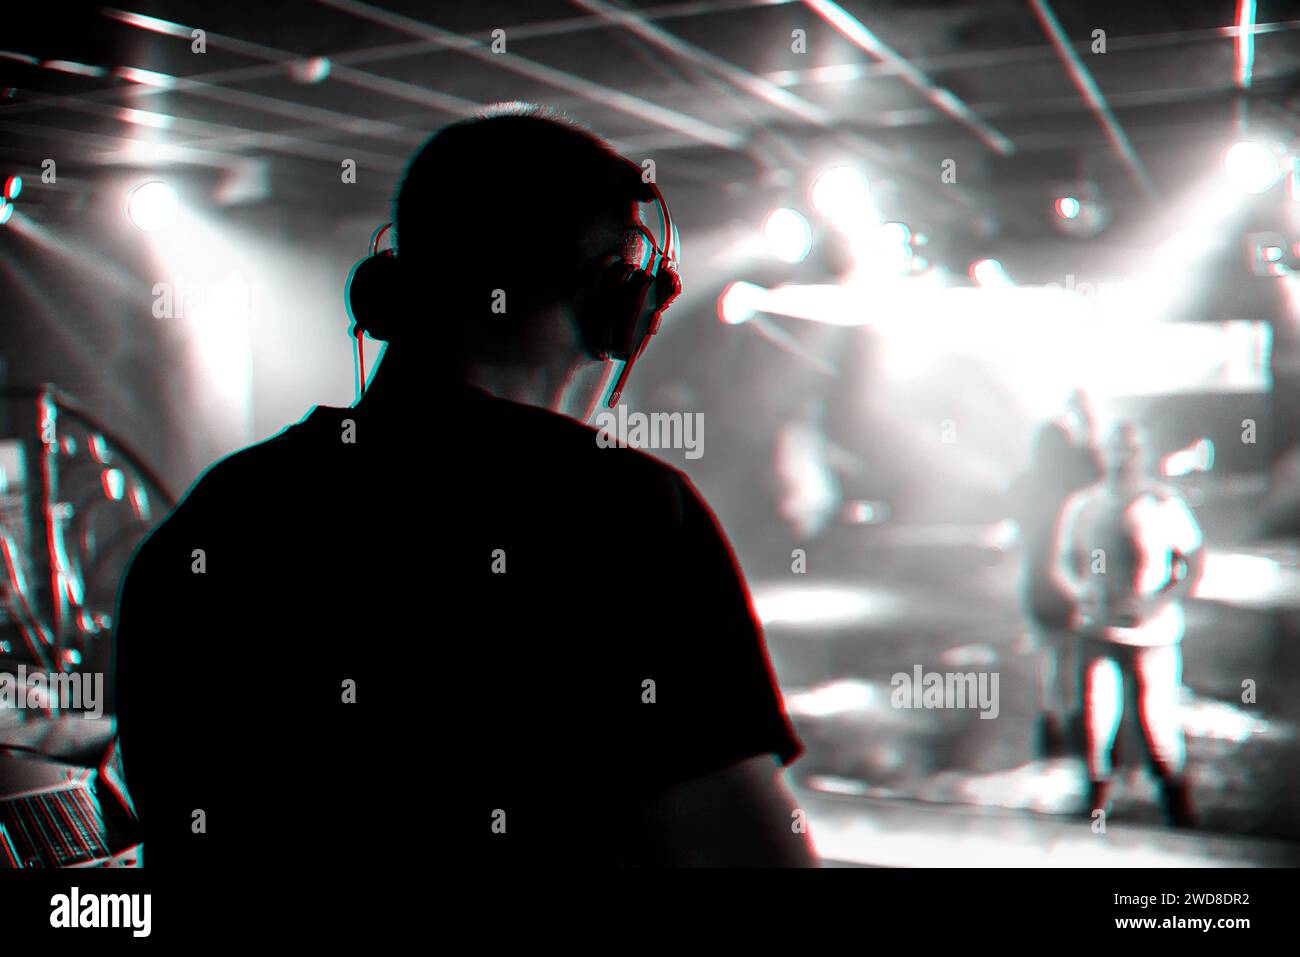 DJ mixes music in a nightclub with people dancing on the dance floor. Black and white photo with glitch effect and small grain Stock Photo